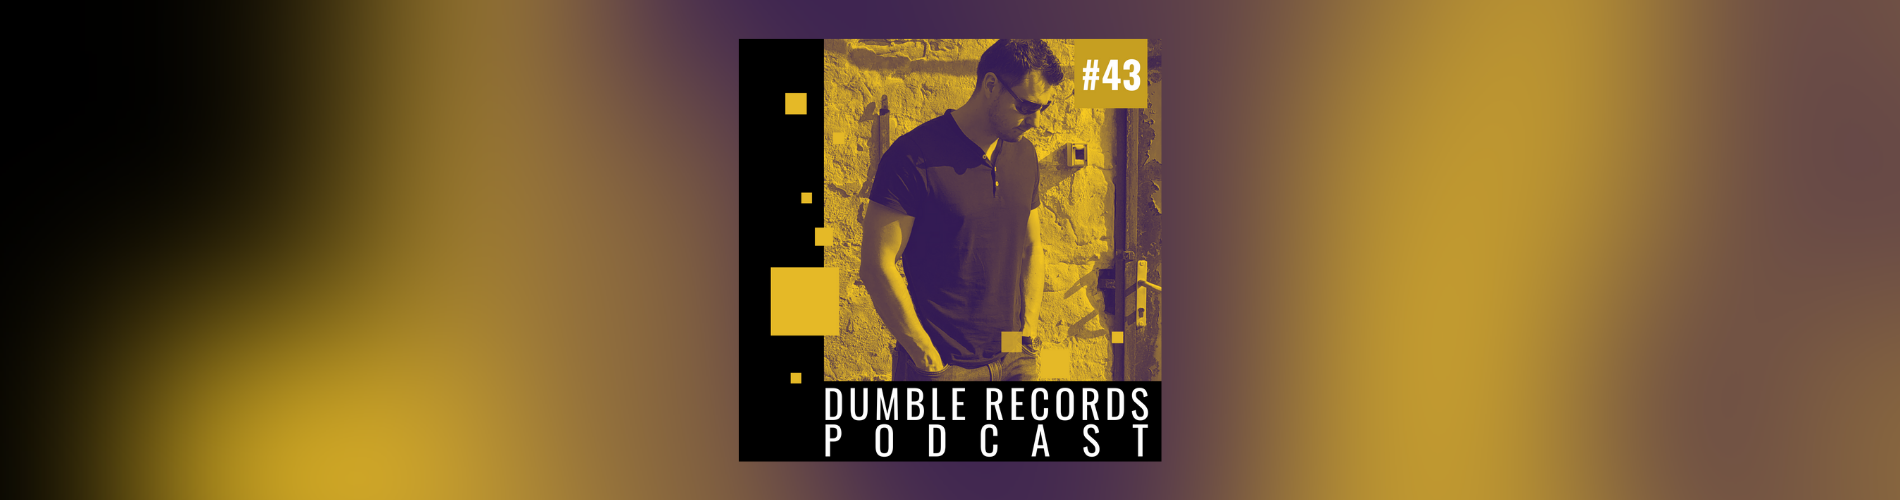 dumble-banner-podcast-043.png